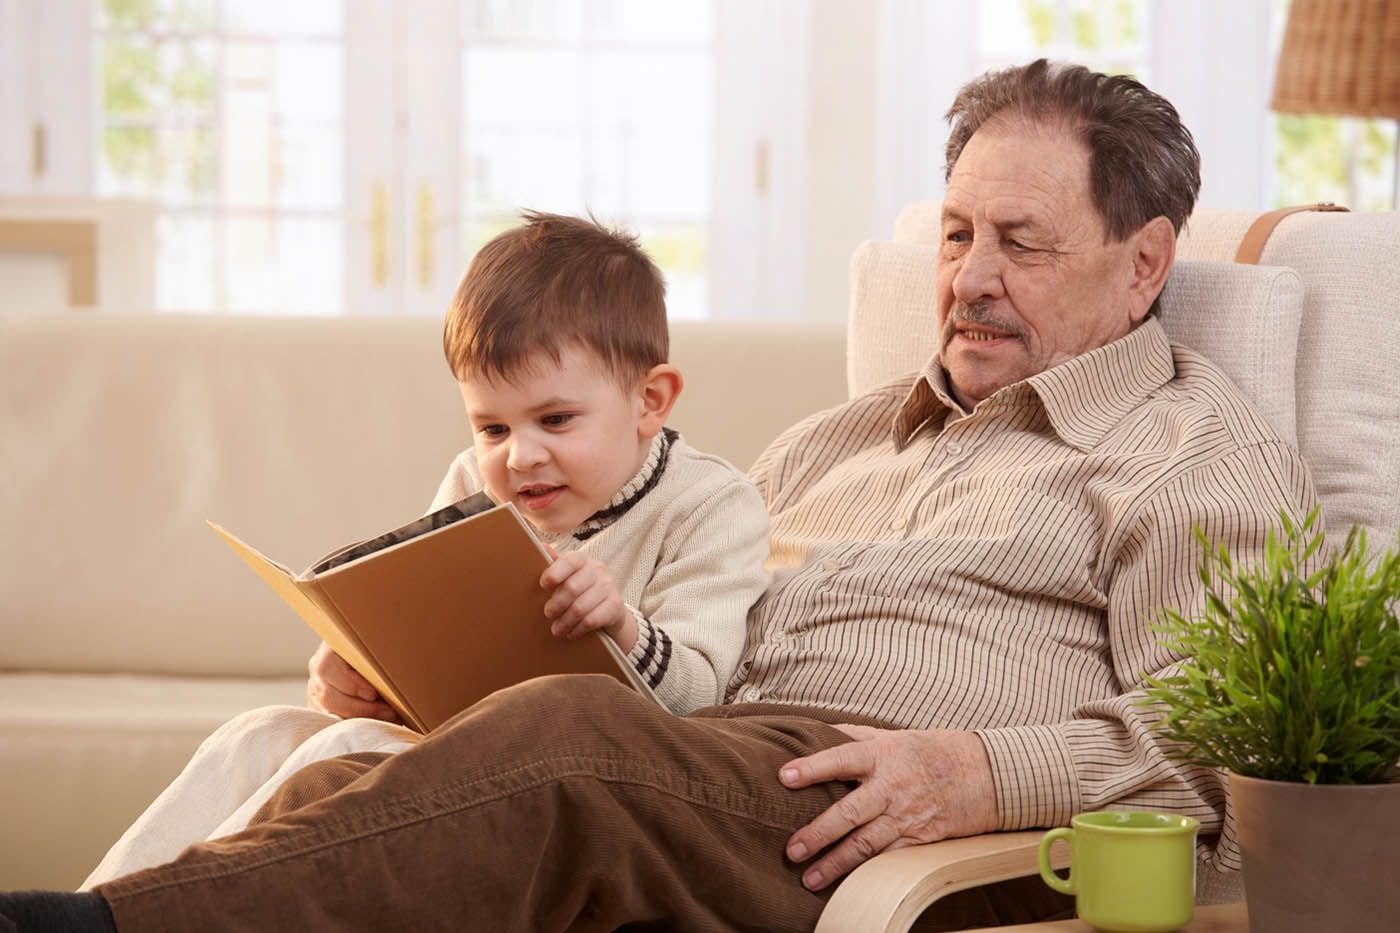 A heartwarming moment captured: A wise grandfather engrossed in a book, sharing stories with his attentive grandson.